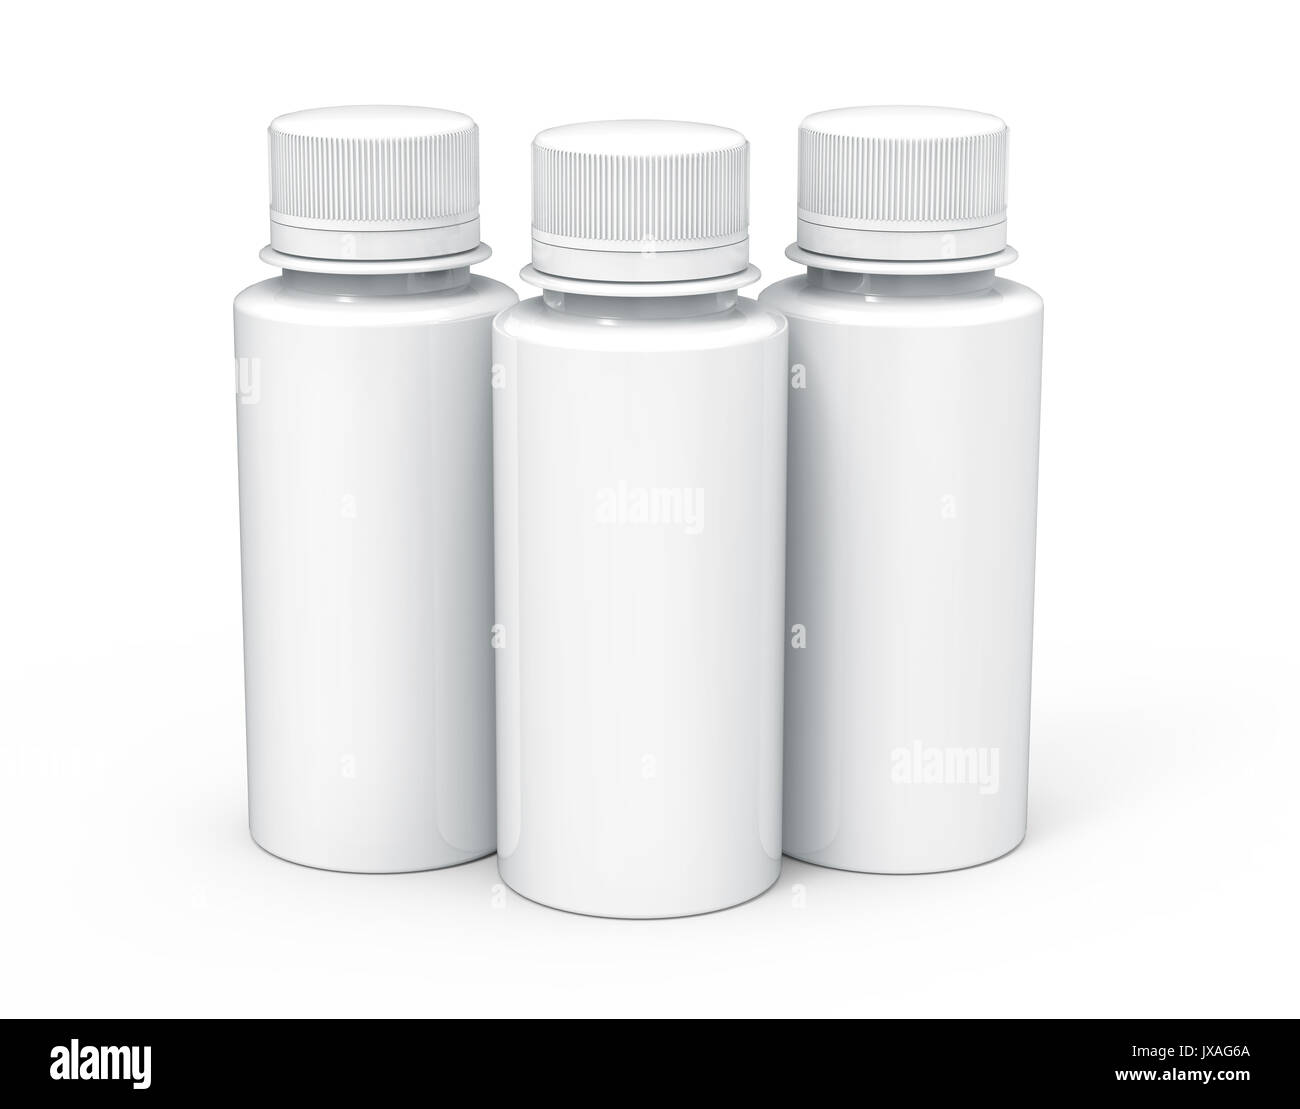 Plastic bottle for drinks, blank bottle mockup template in 3d rendering isolated on white for design uses, three bottles collection Stock Photo